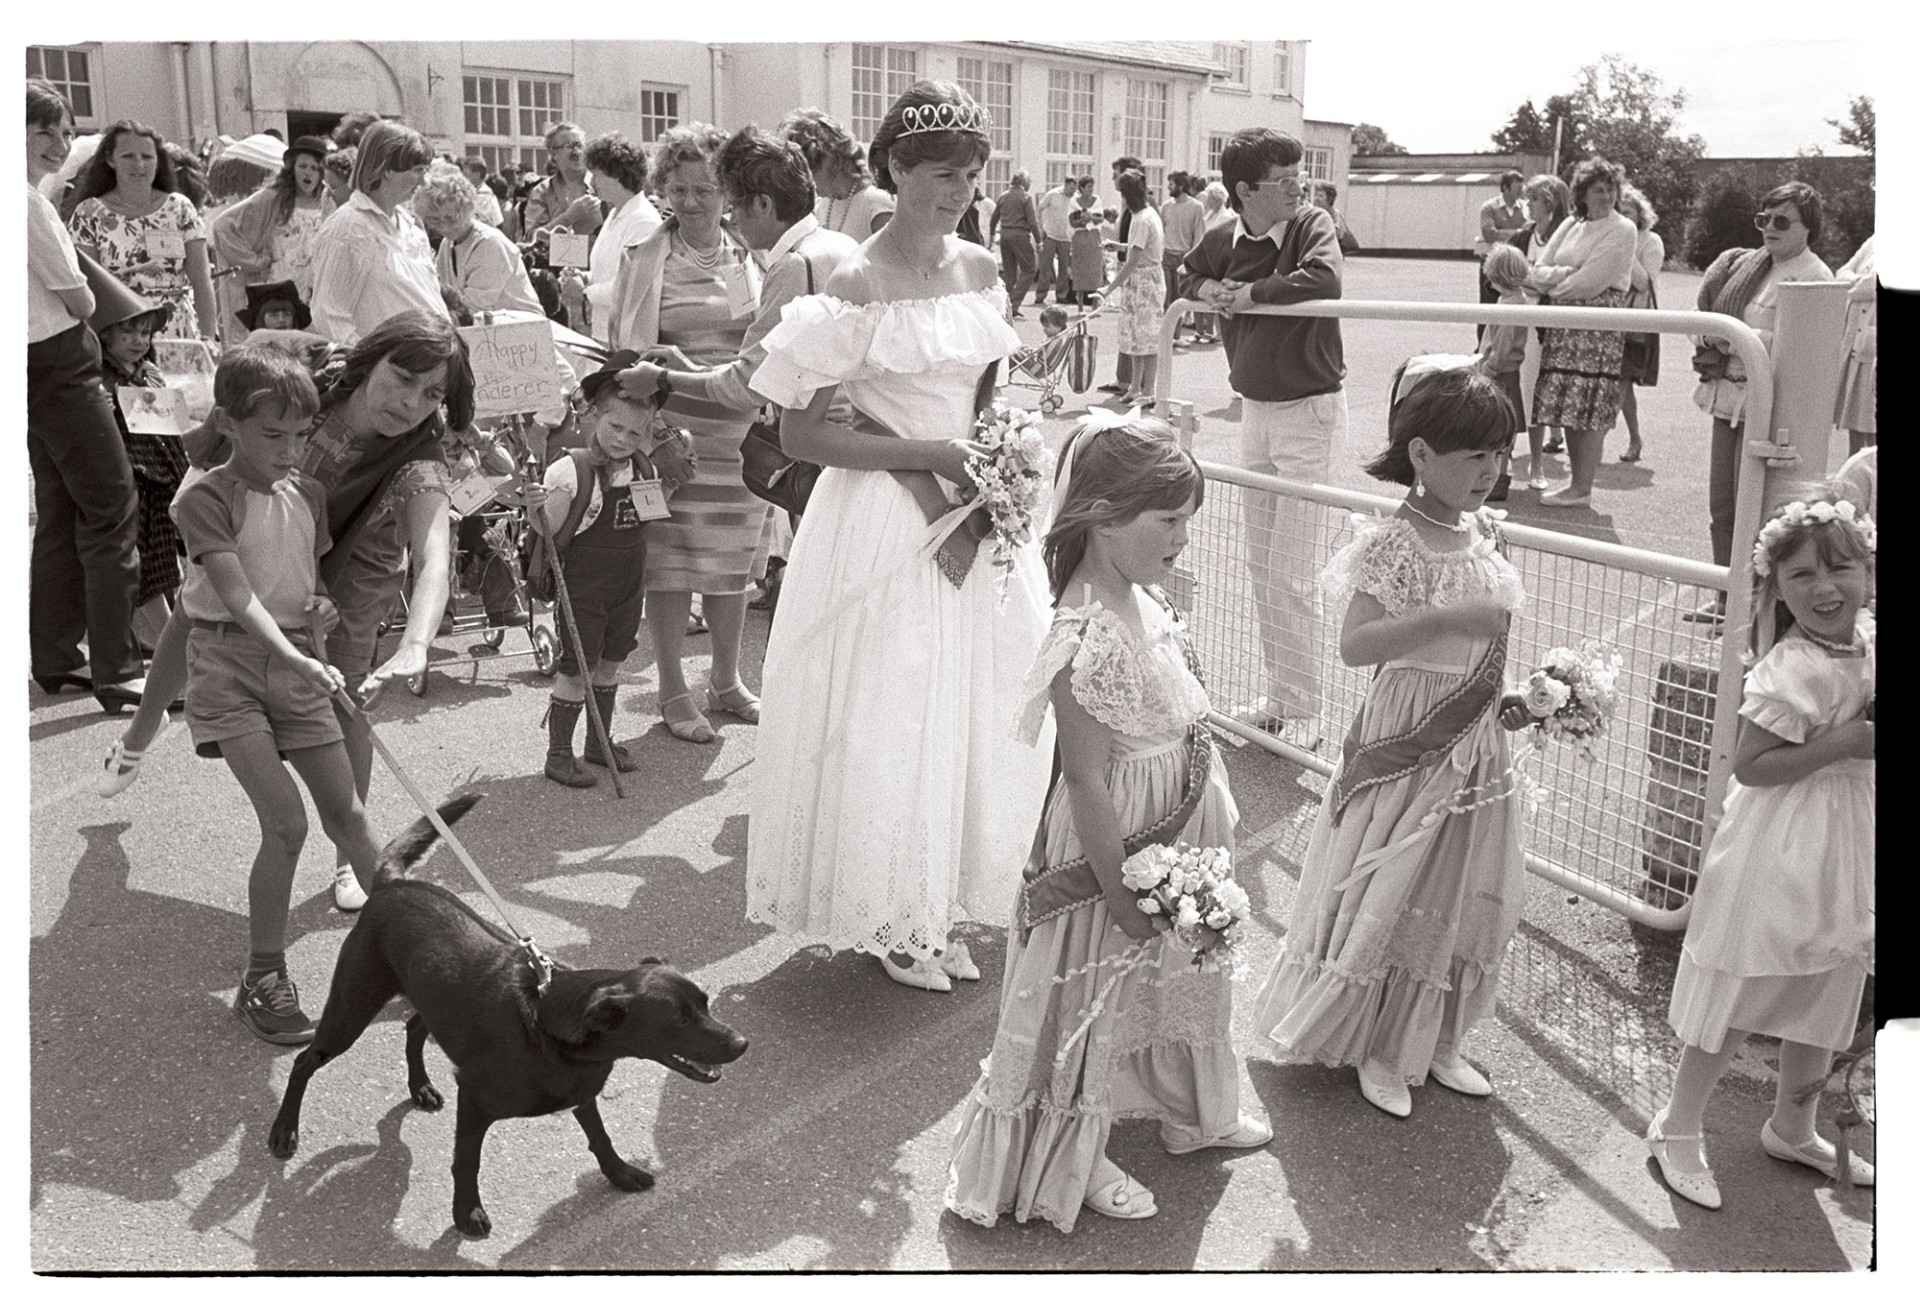 Procession, Queen and attendants about to set off to parade into village. Boy and dog too! 
[Debbie Hawkins, Chulmleigh Fair Queen, and her attendants setting off to parade through the town for the Fair. They are holding bouquets of flowers. A woman is about to hold back a boy and dog who are joining the parade. Other people, including children in fancy dress, are getting ready for the parade in the background.]